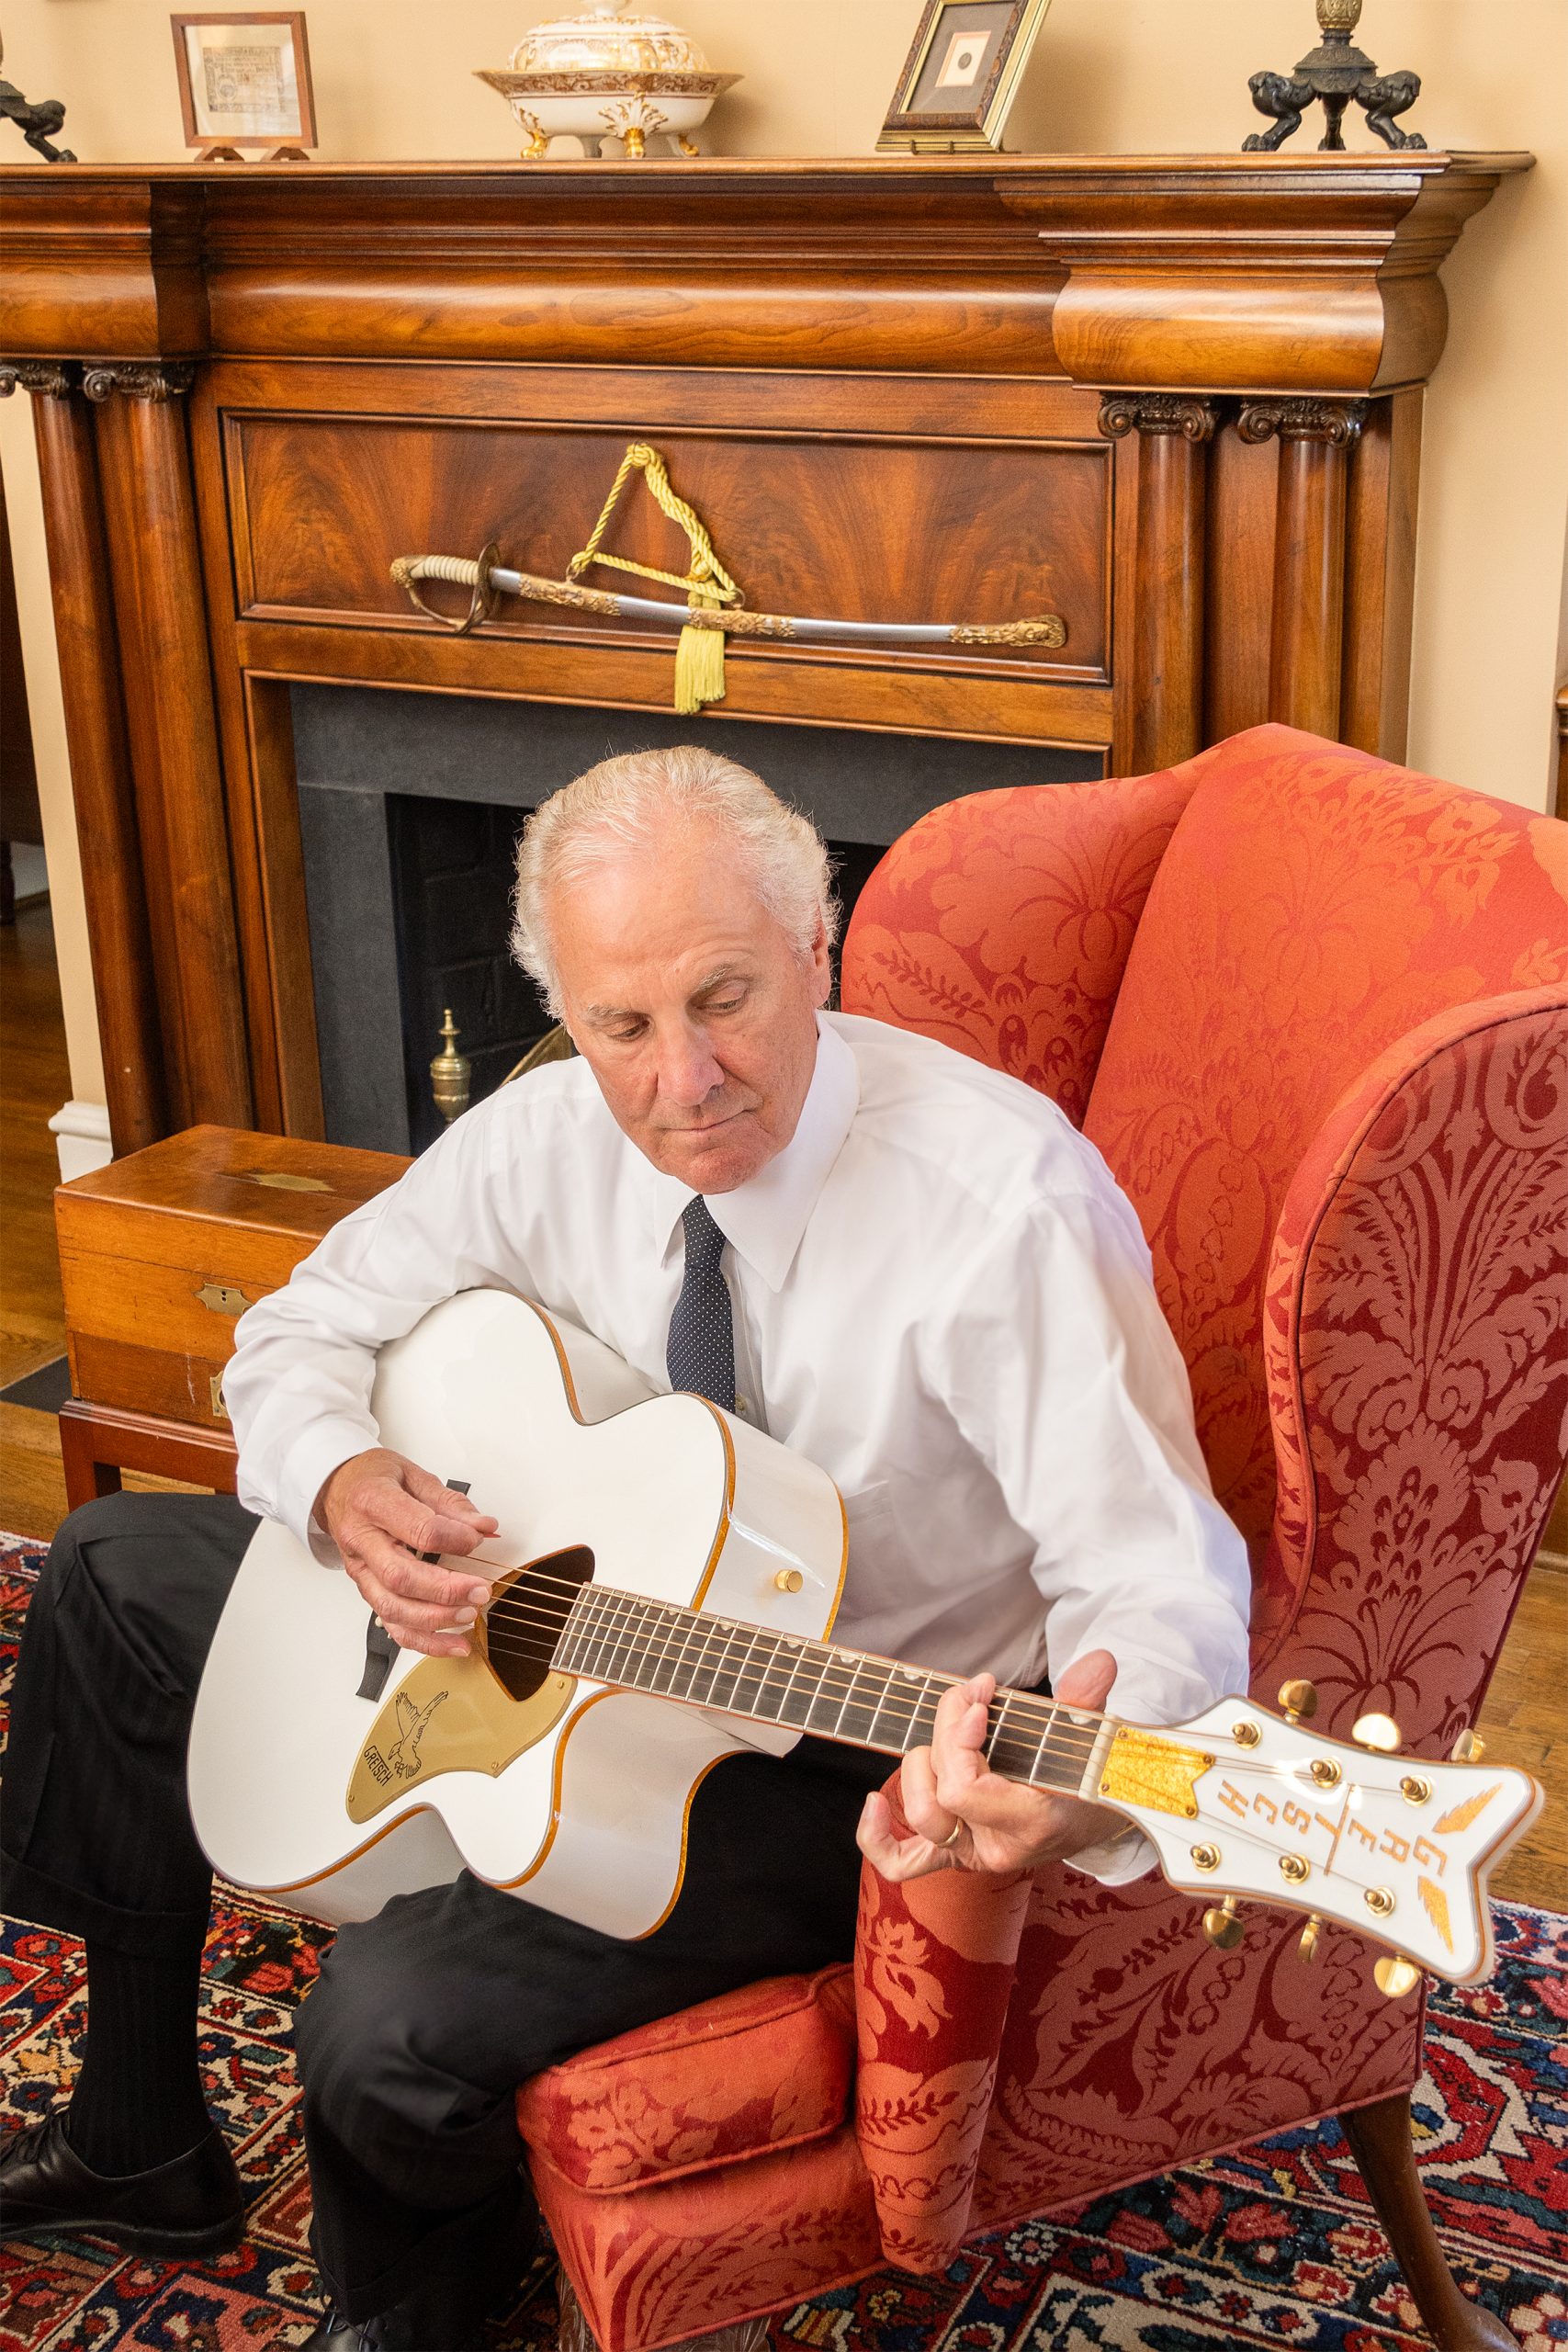 Playing the guitar is one of the governor’s favorite pastimes, and staff around the mansion say it’s not unusual to hear the sounds of a guitar coming from the Library, the Large Drawing Room, or even the top of the stairs leading into the private quarters. 